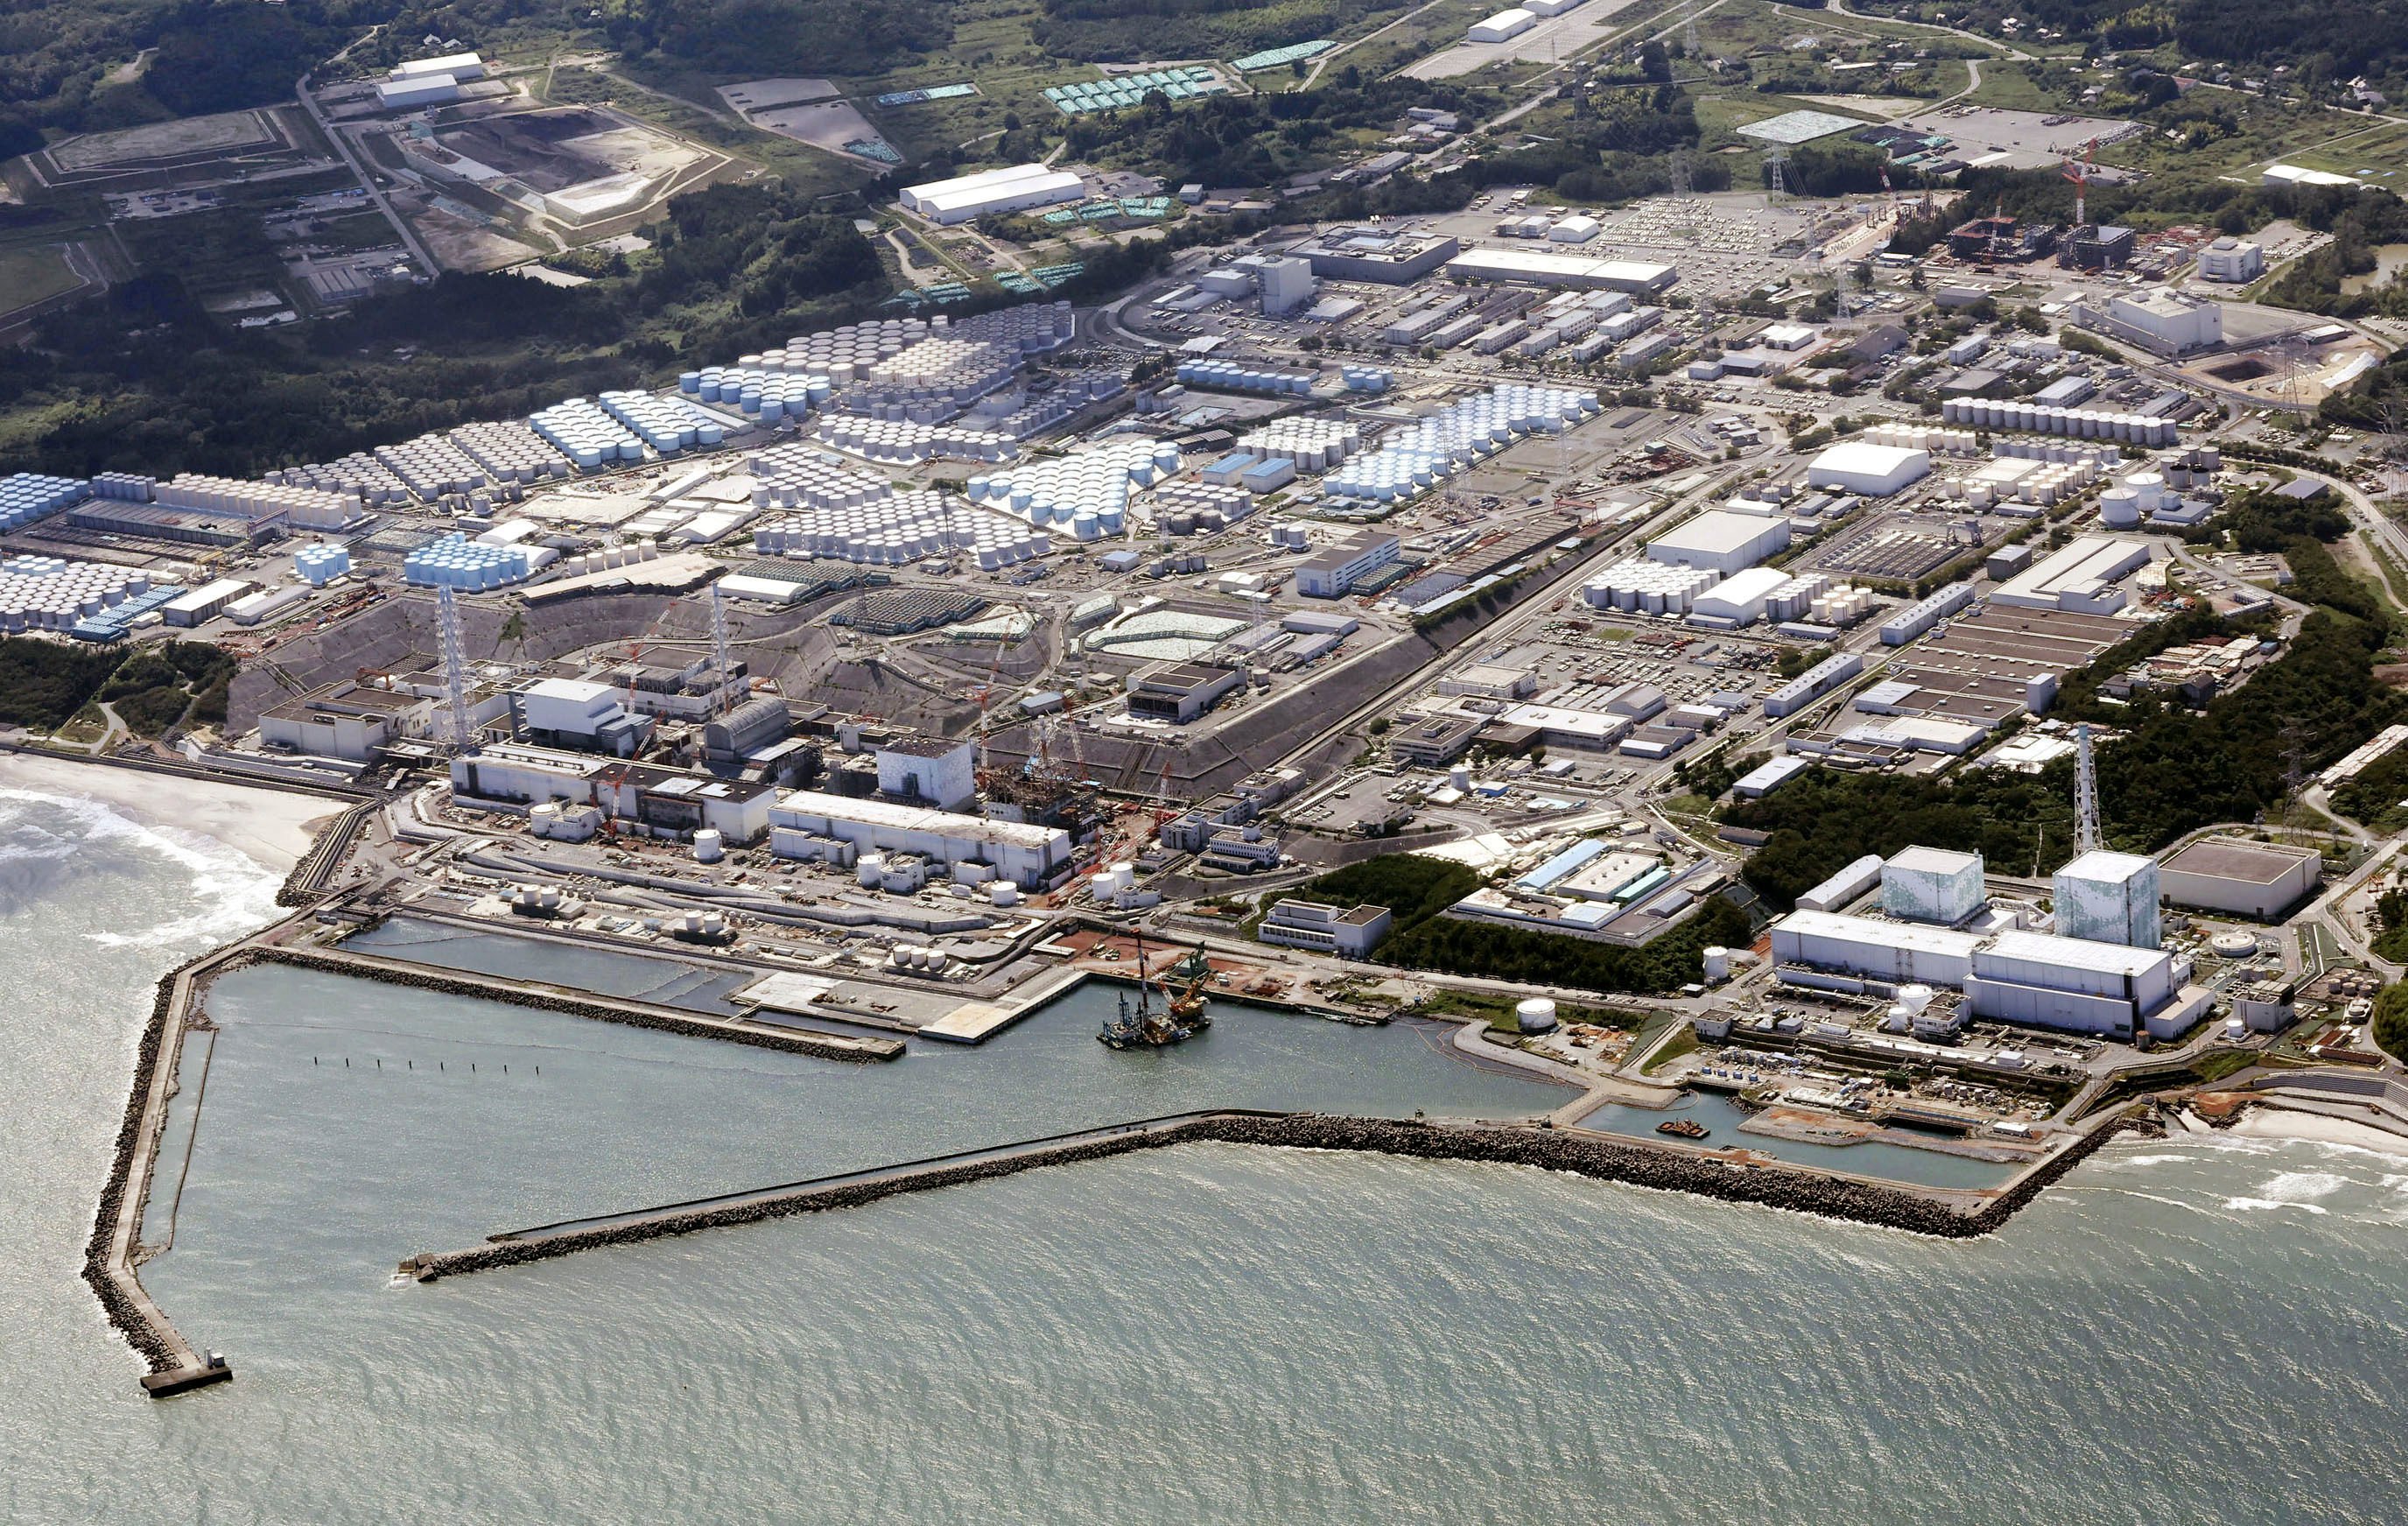 An aerial view of the Fukushima Daiichi nuclear power plant, situated in coastal towns of both Okuma and Futaba, northeastern Japan, in August 2023. Photo: Kyodo News via AP